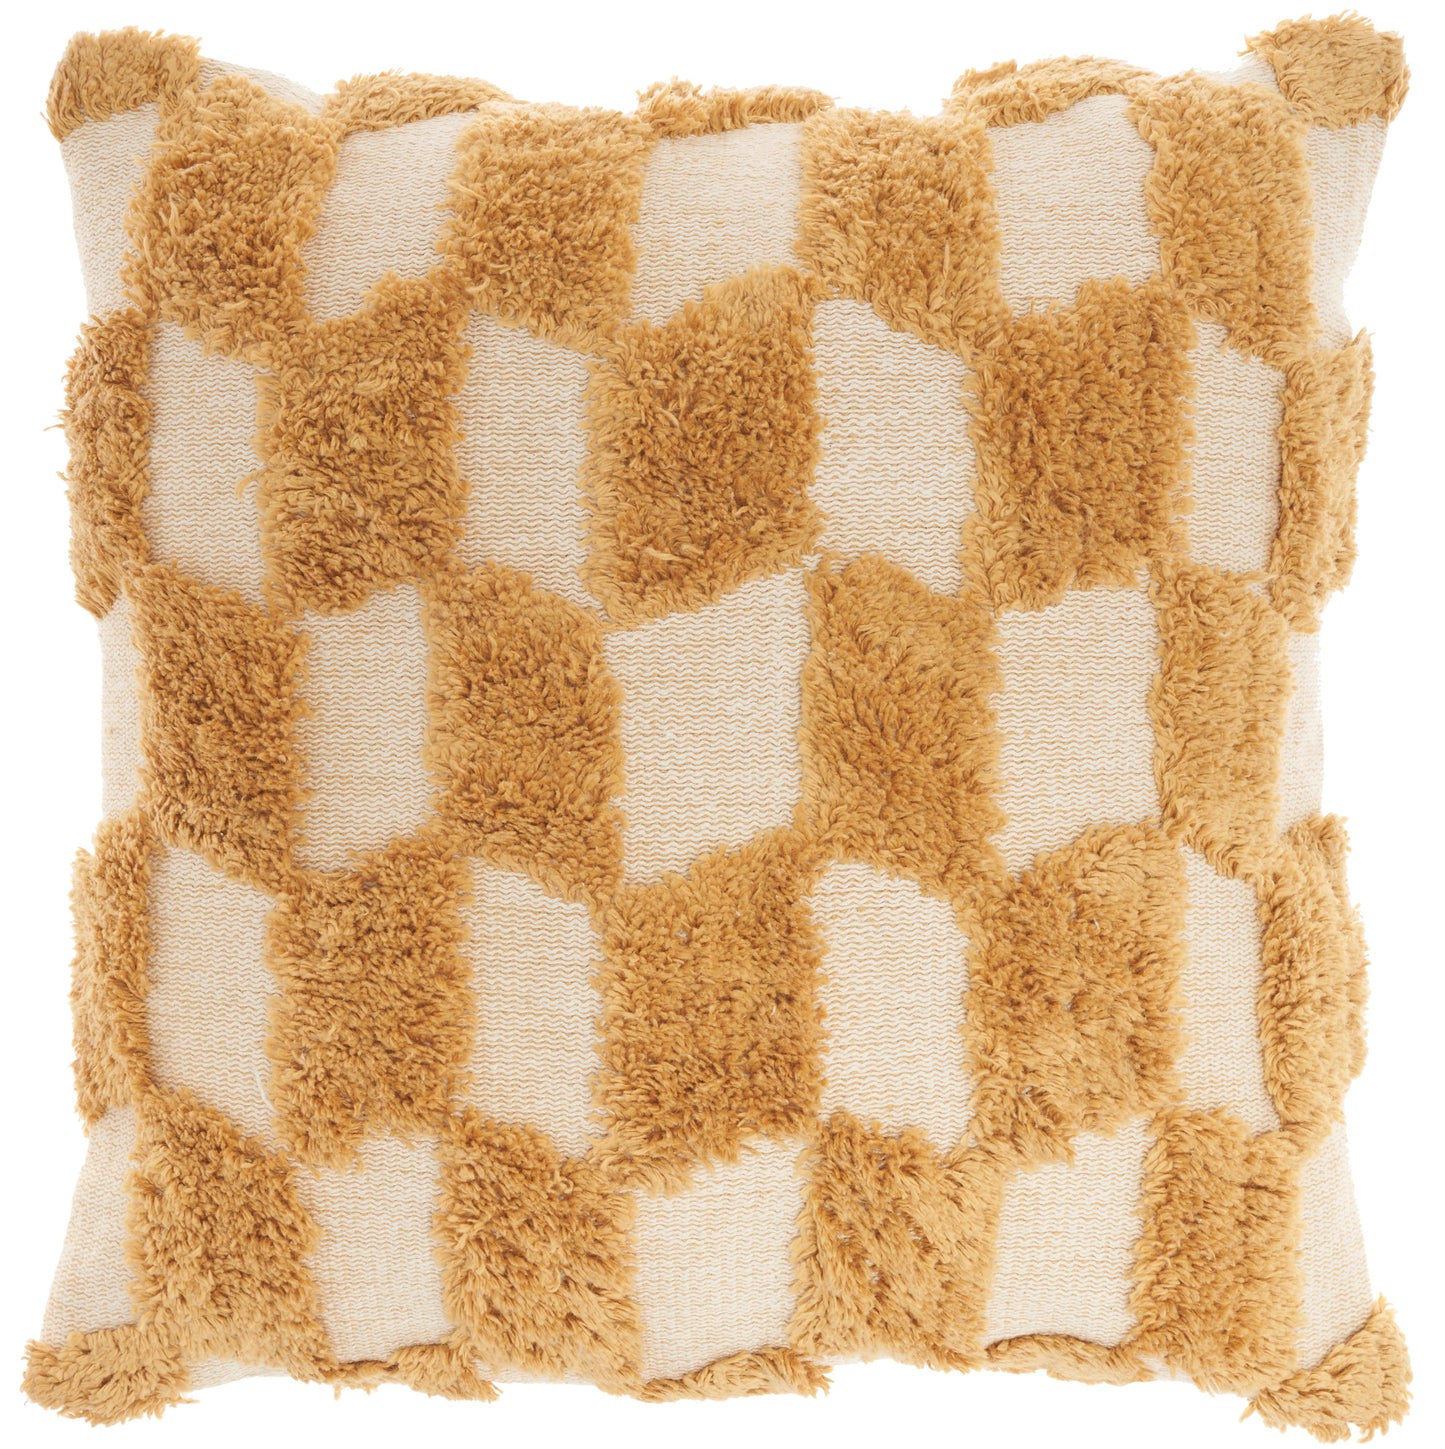 Nicole Curtis Pillow RC116 Cotton Tufted Diag Checkers Throw Pillow From Nicole Curtis By Nourison Rugs